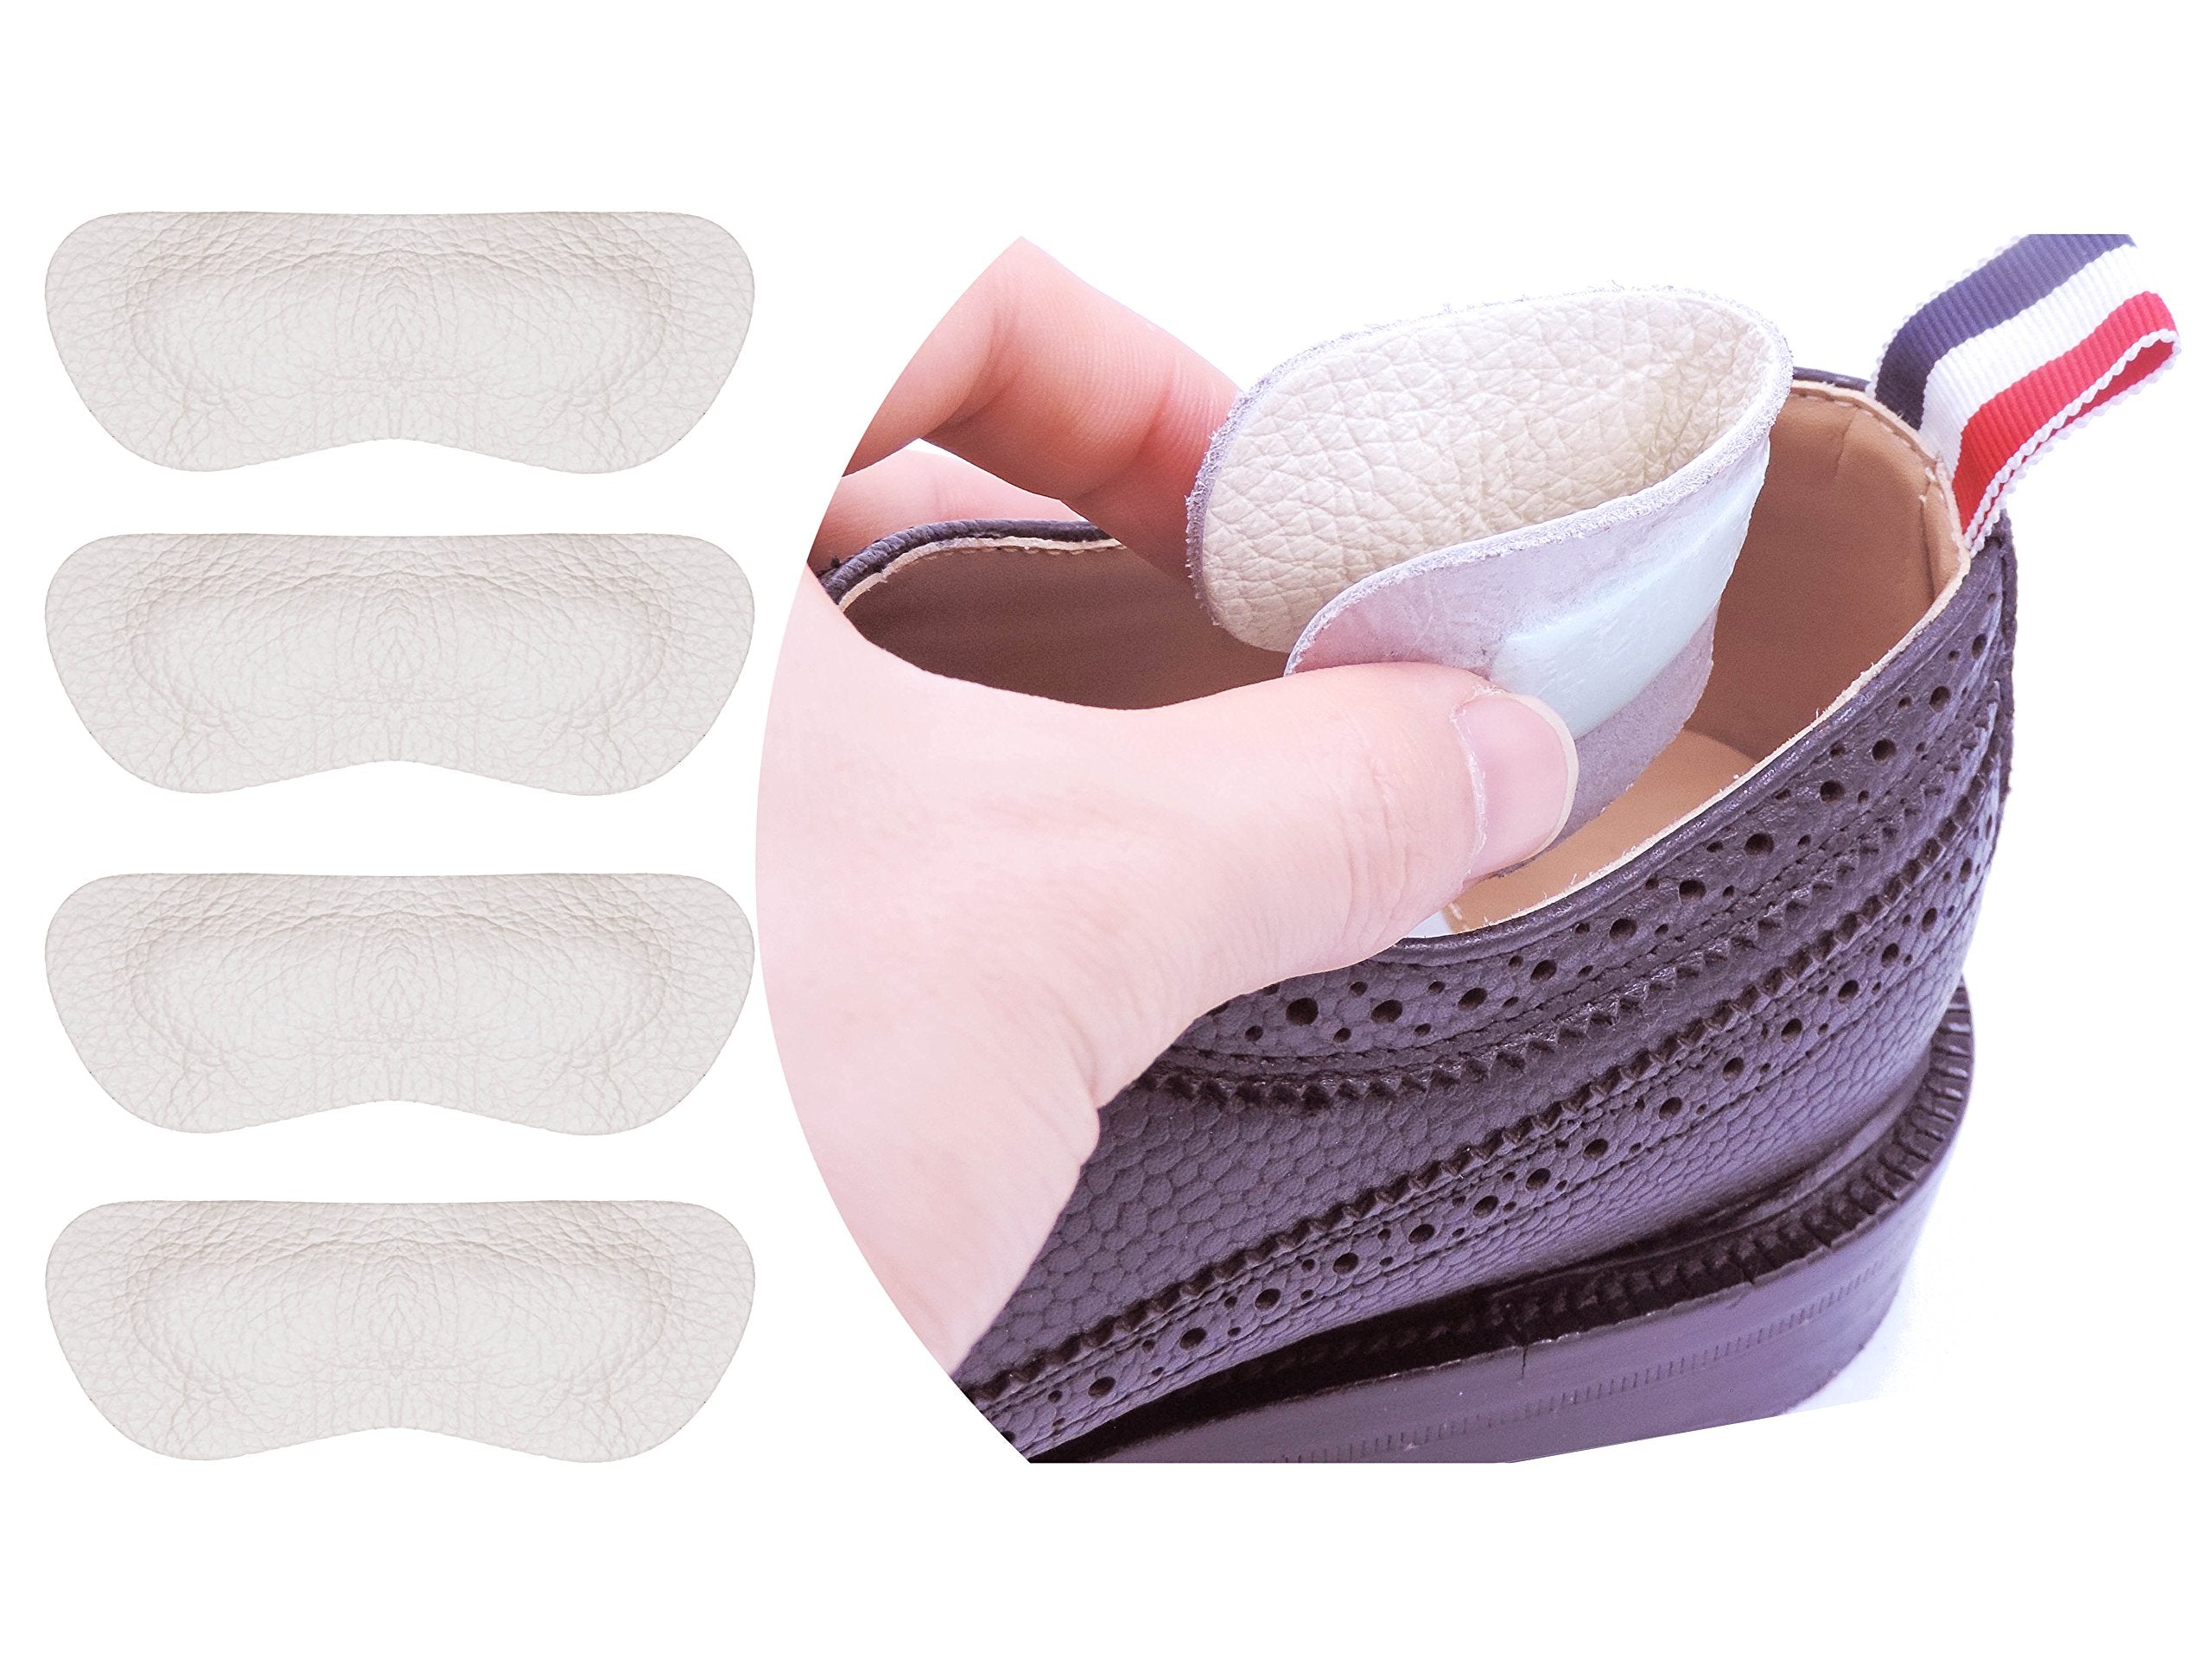 heel inserts for shoes that are too big